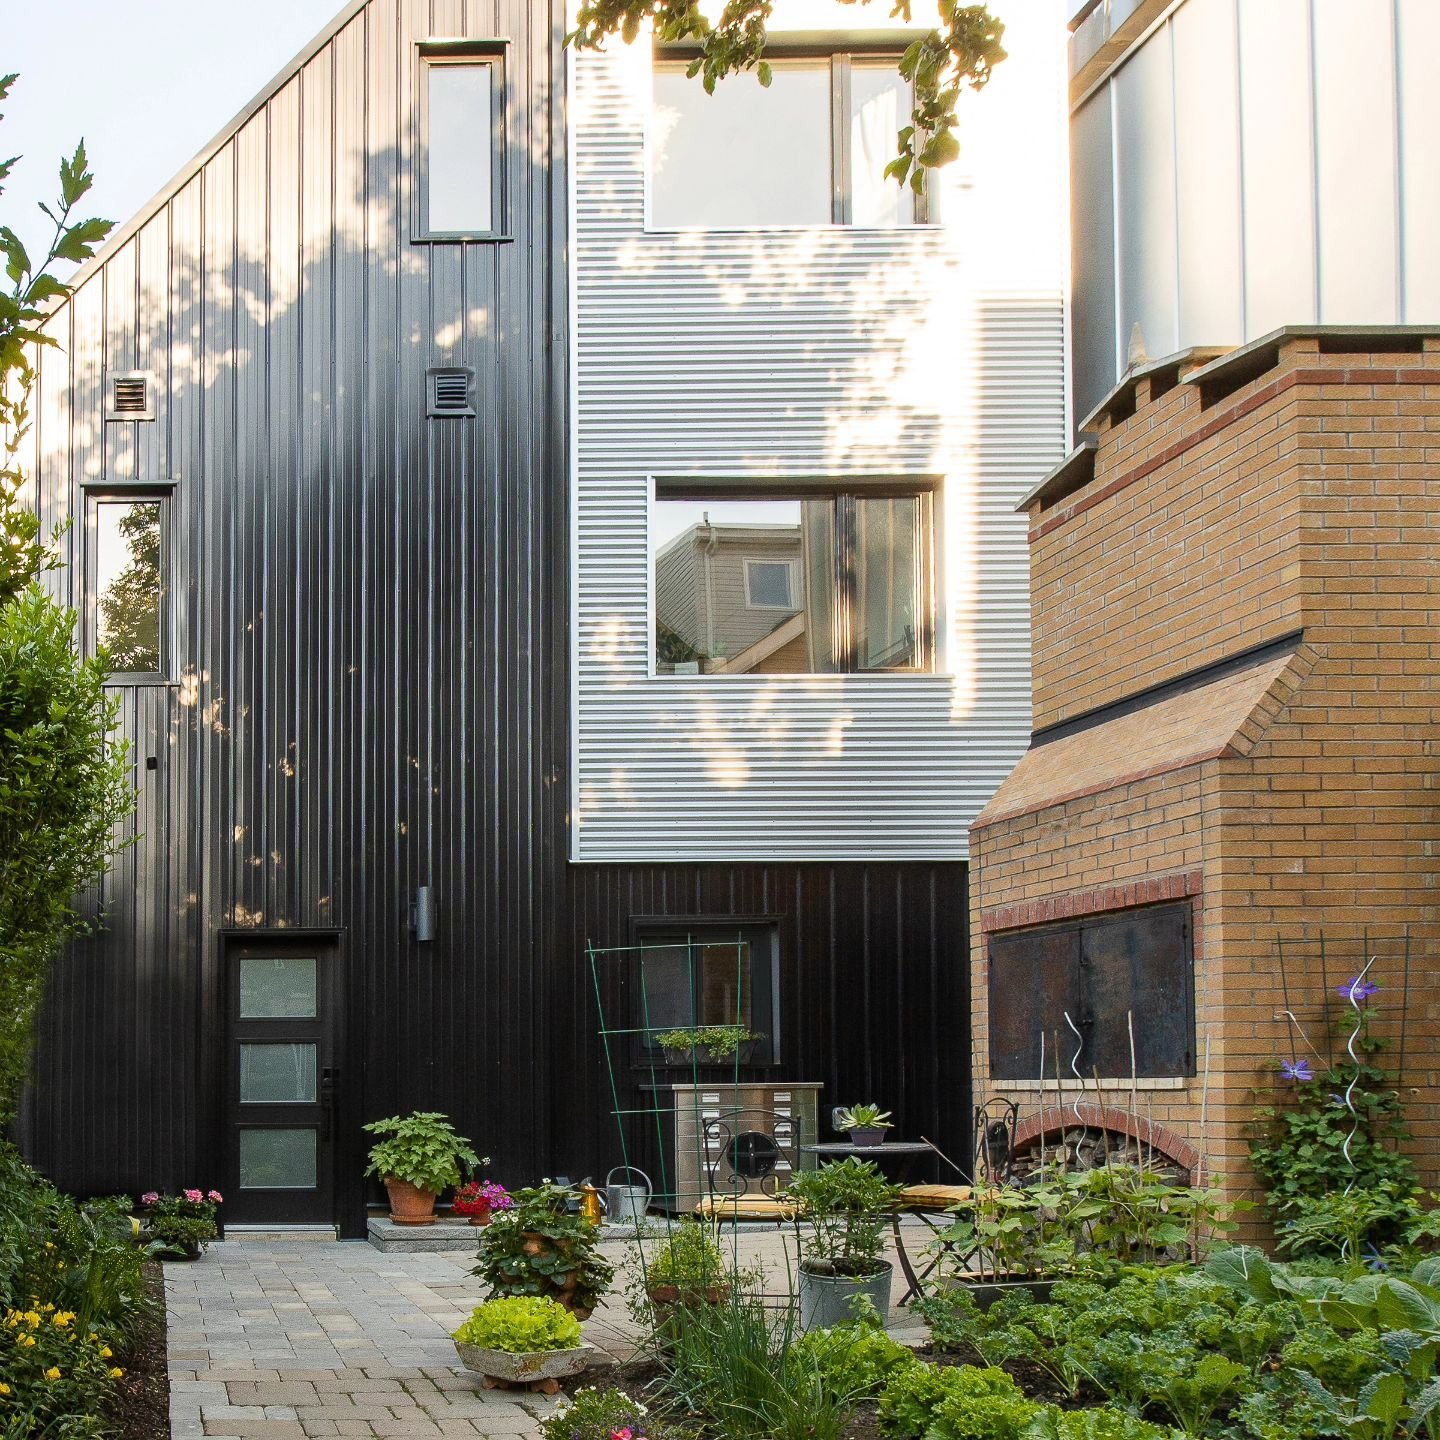 Sunday Showcase:  3 STOREY LANEWAY!
Trinity Bellwoods Laneway House
1300 sqft + 600 sqft garage
.
Vov&ocirc; (grandpa in portuguese) was still living in their old downtown neighbourhood and wanted to help. Toronto's changing lanes policies offered Vo